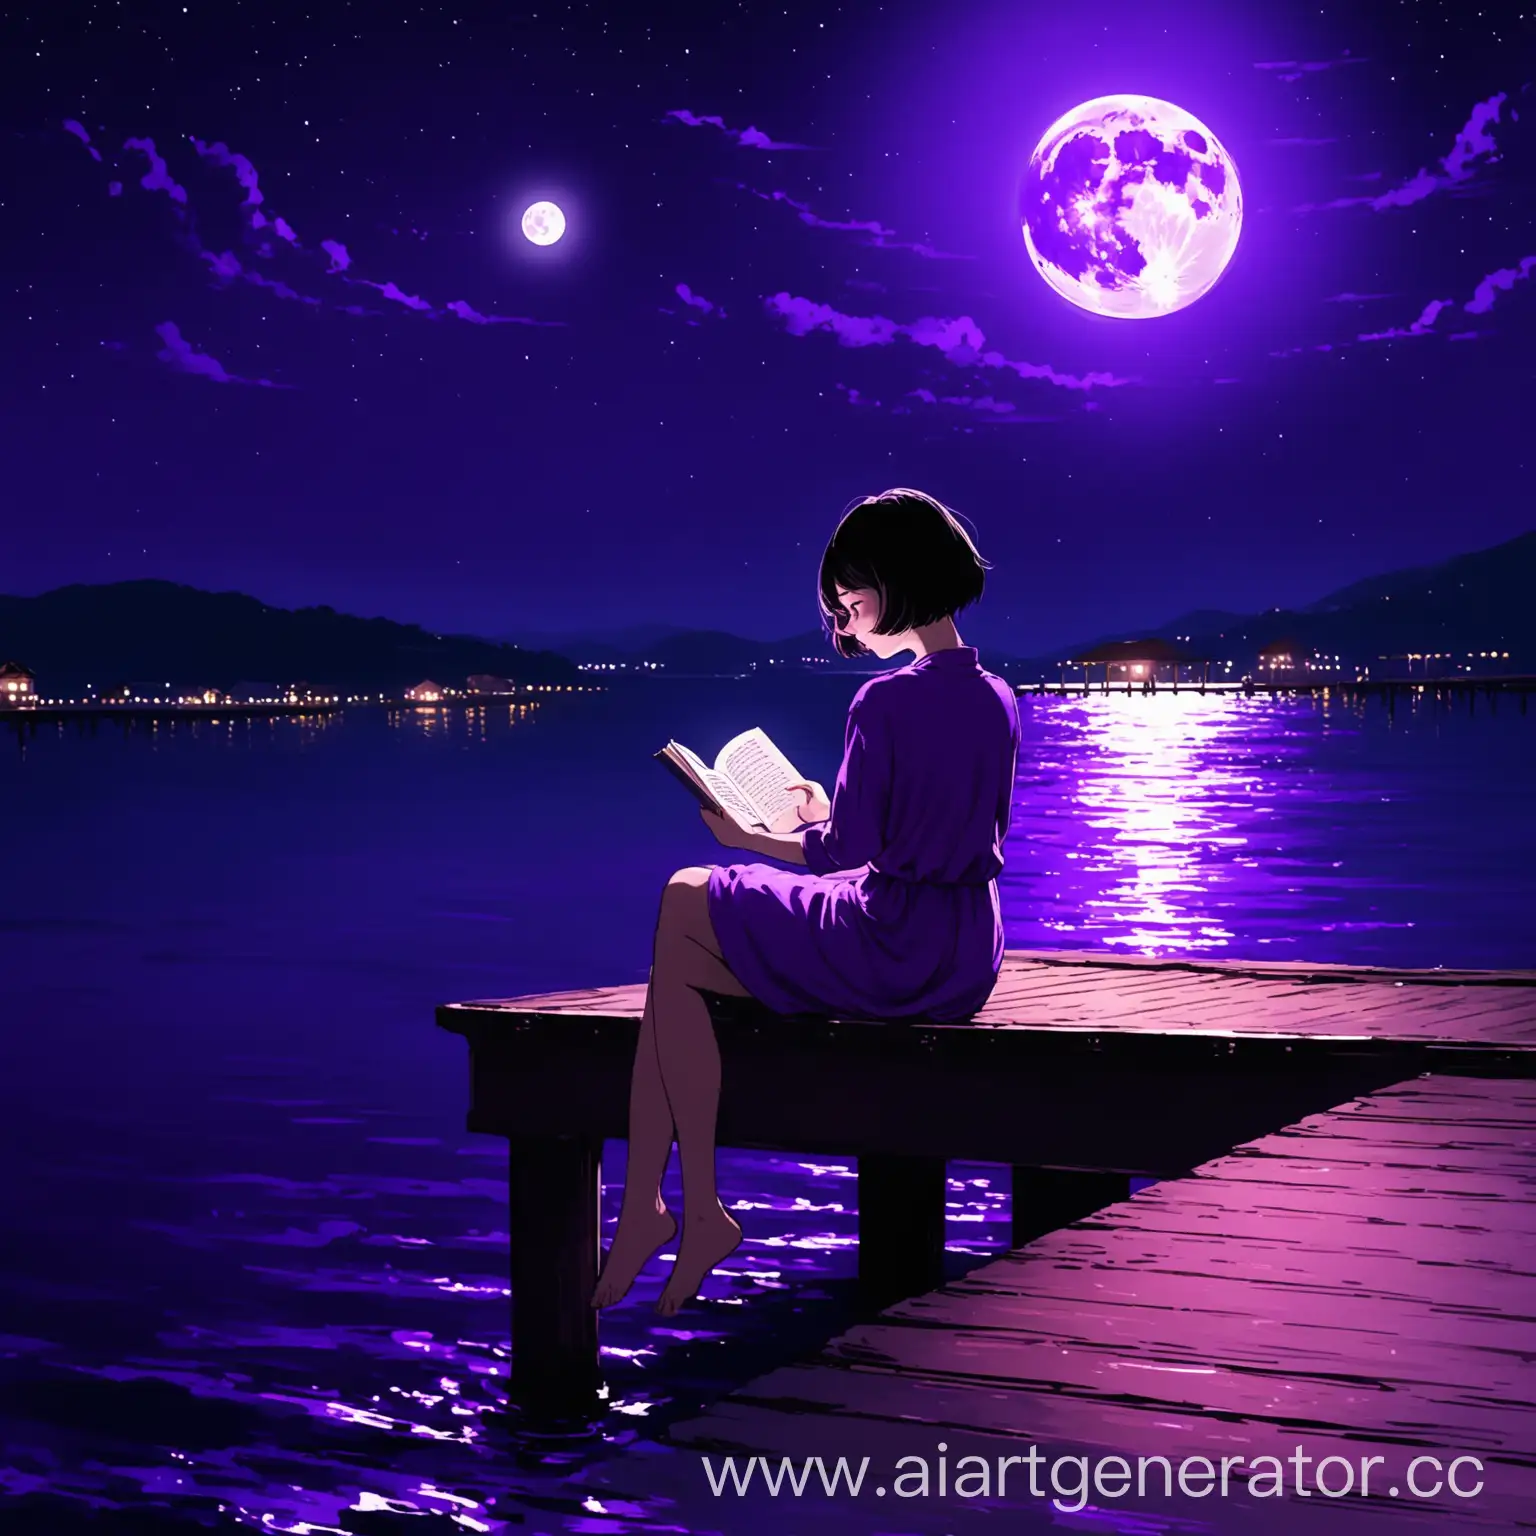 Girl-Reading-Book-on-Pier-Under-Purple-Night-Sky-with-Full-Moon